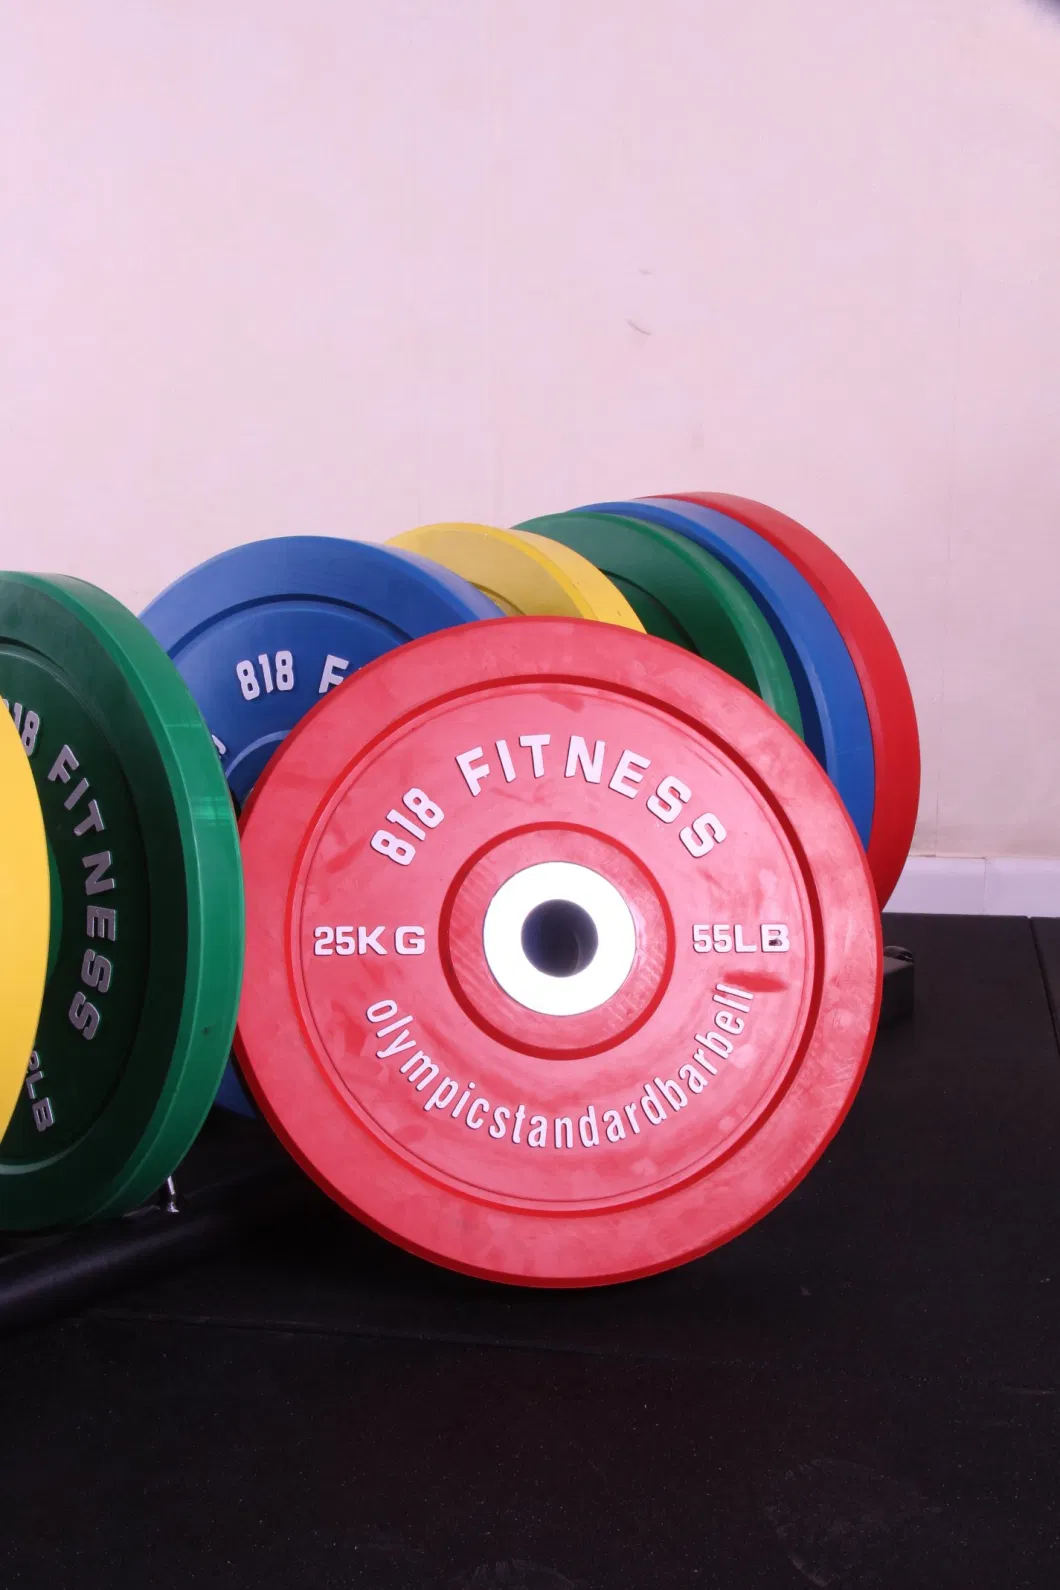 Gym Equipment Bumper Rubber Weightlifing Barbell Weight Plates